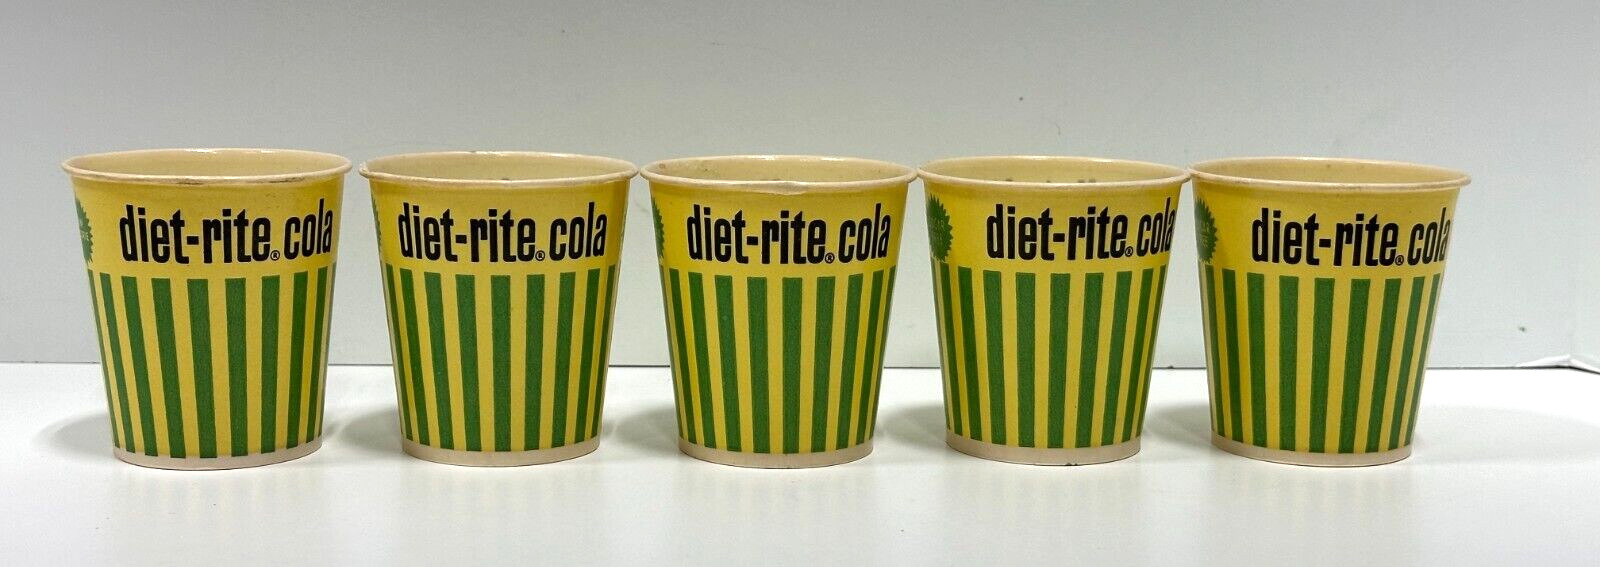 Vintage advertising Diet-Rite cola no 47 lily water cups lot of 5 collectible